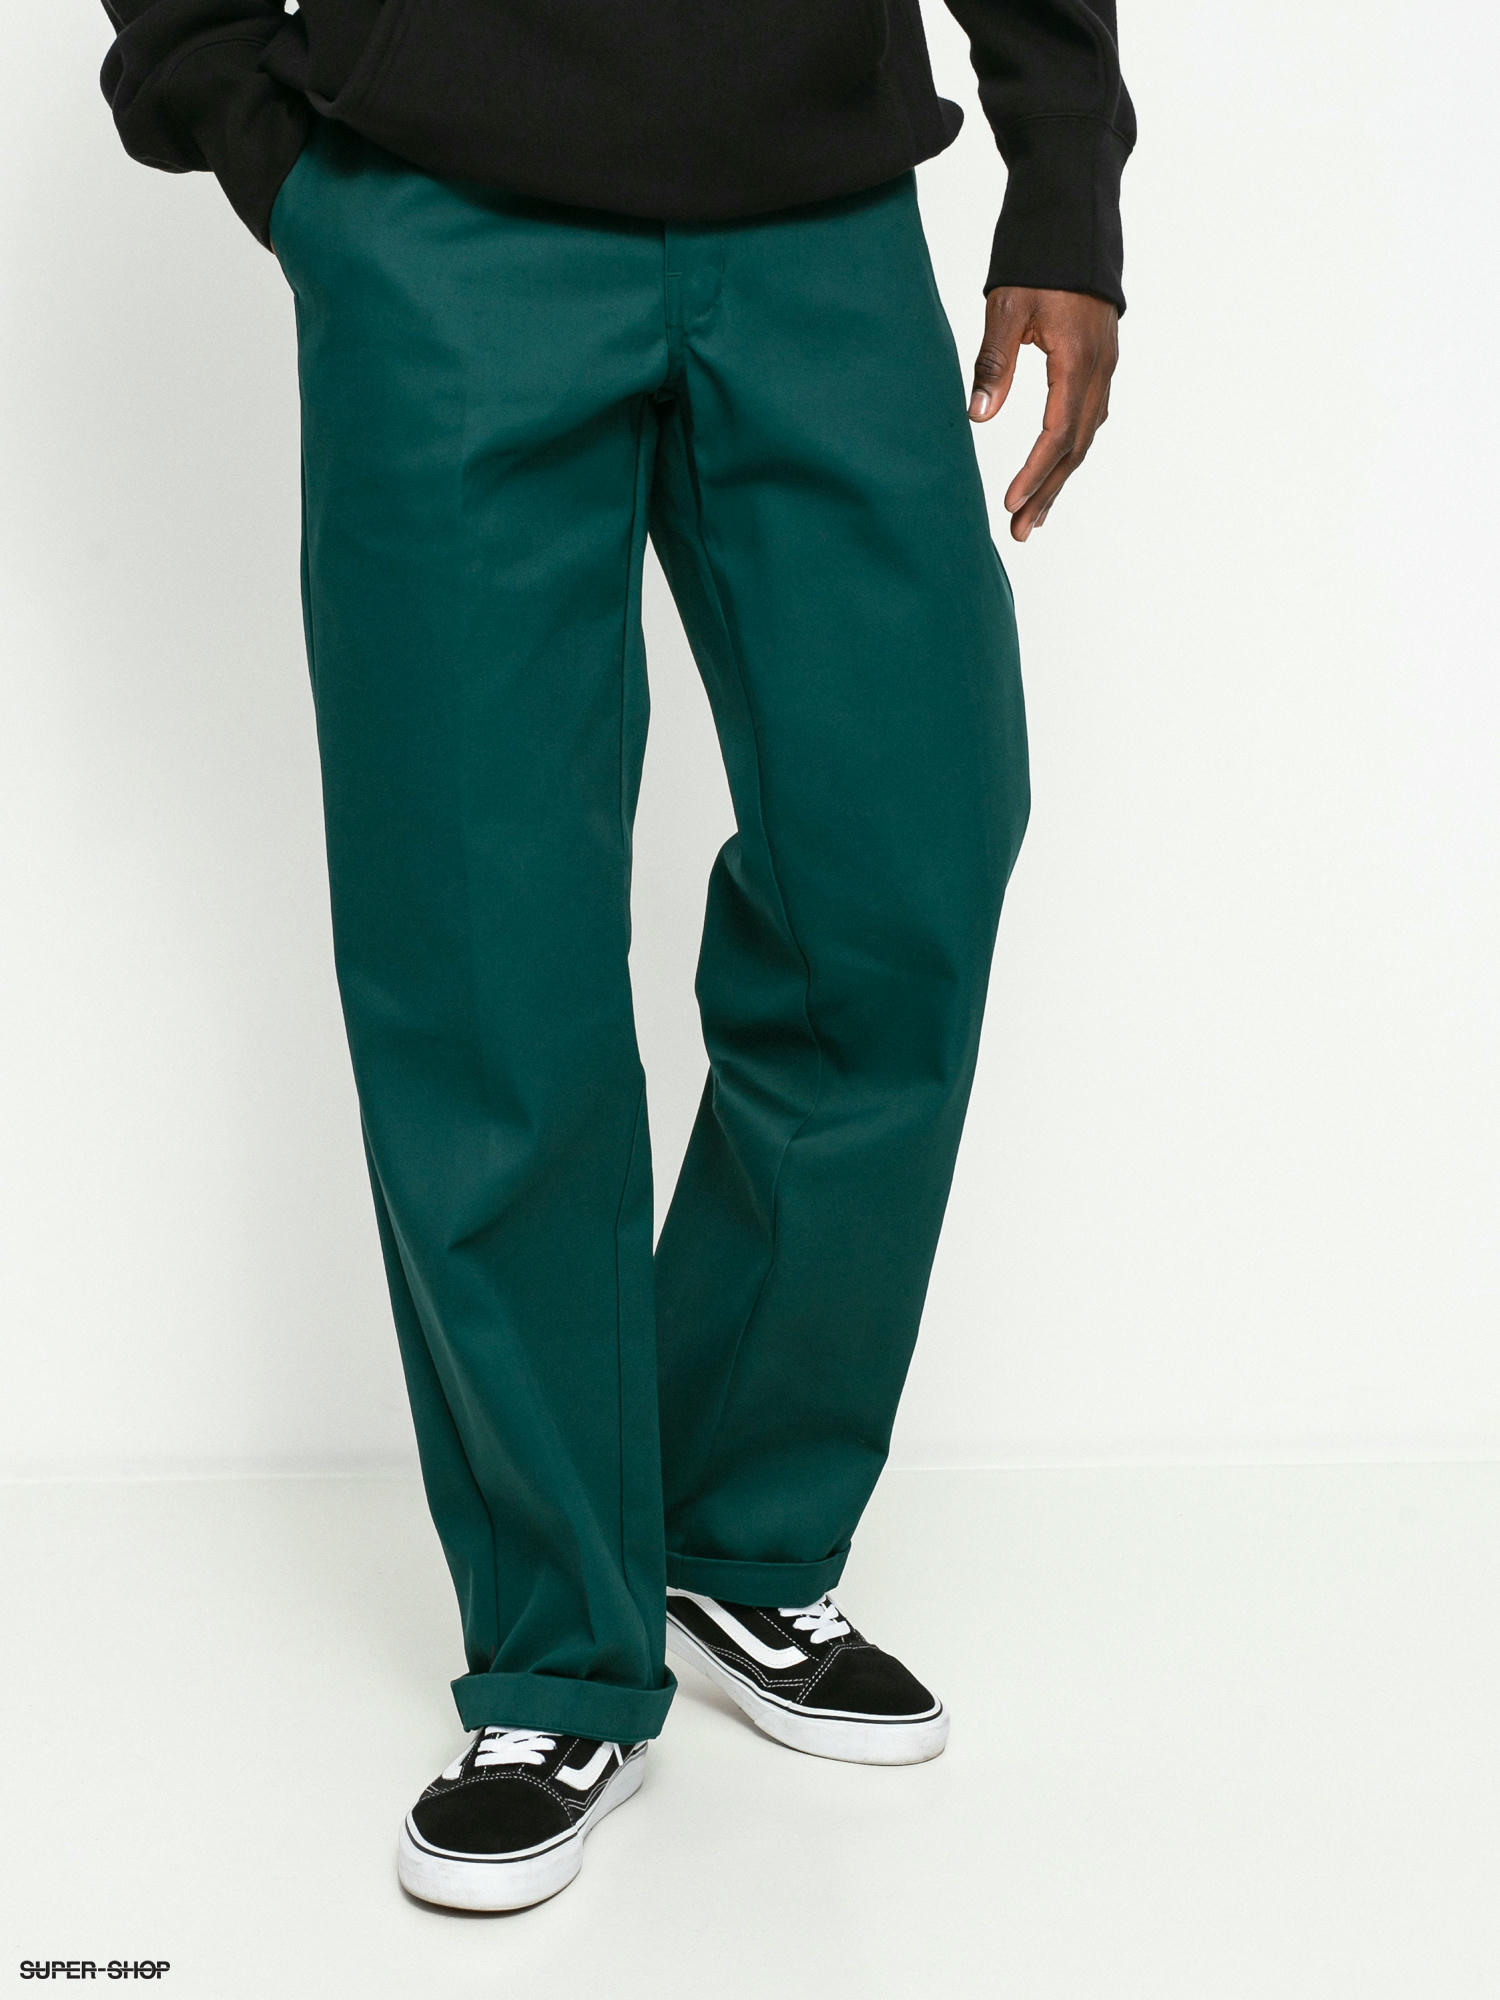 Dickies Pants Mens Relaxed Fit Straight Leg Green Cargo Canvas Pant Sz  44x30 | eBay